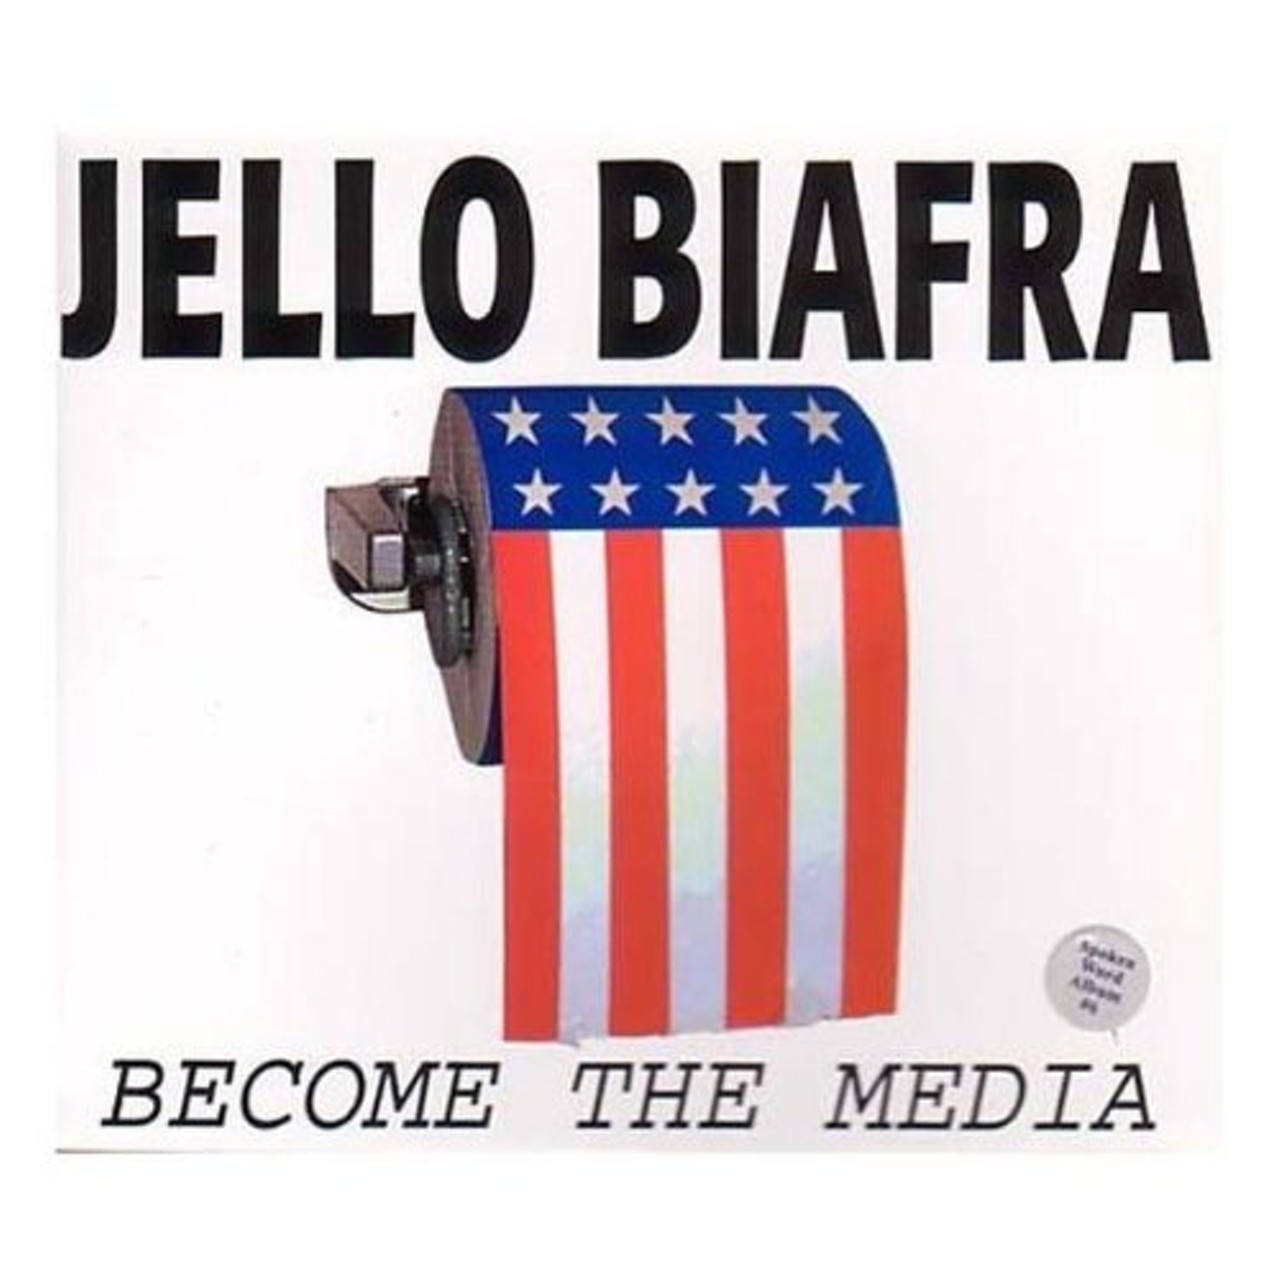 Jello Biafra - Become the Media (2001)
If there's an image that can sum up Jello Biafra quickly, it's this one. The American flag strung out as a roll of toilet paper should give you a pretty good idea of what to expect from Biafra's spoken word work, much of which was recorded in Seattle, Denver and Boulder prior to his bid for President in 2000.